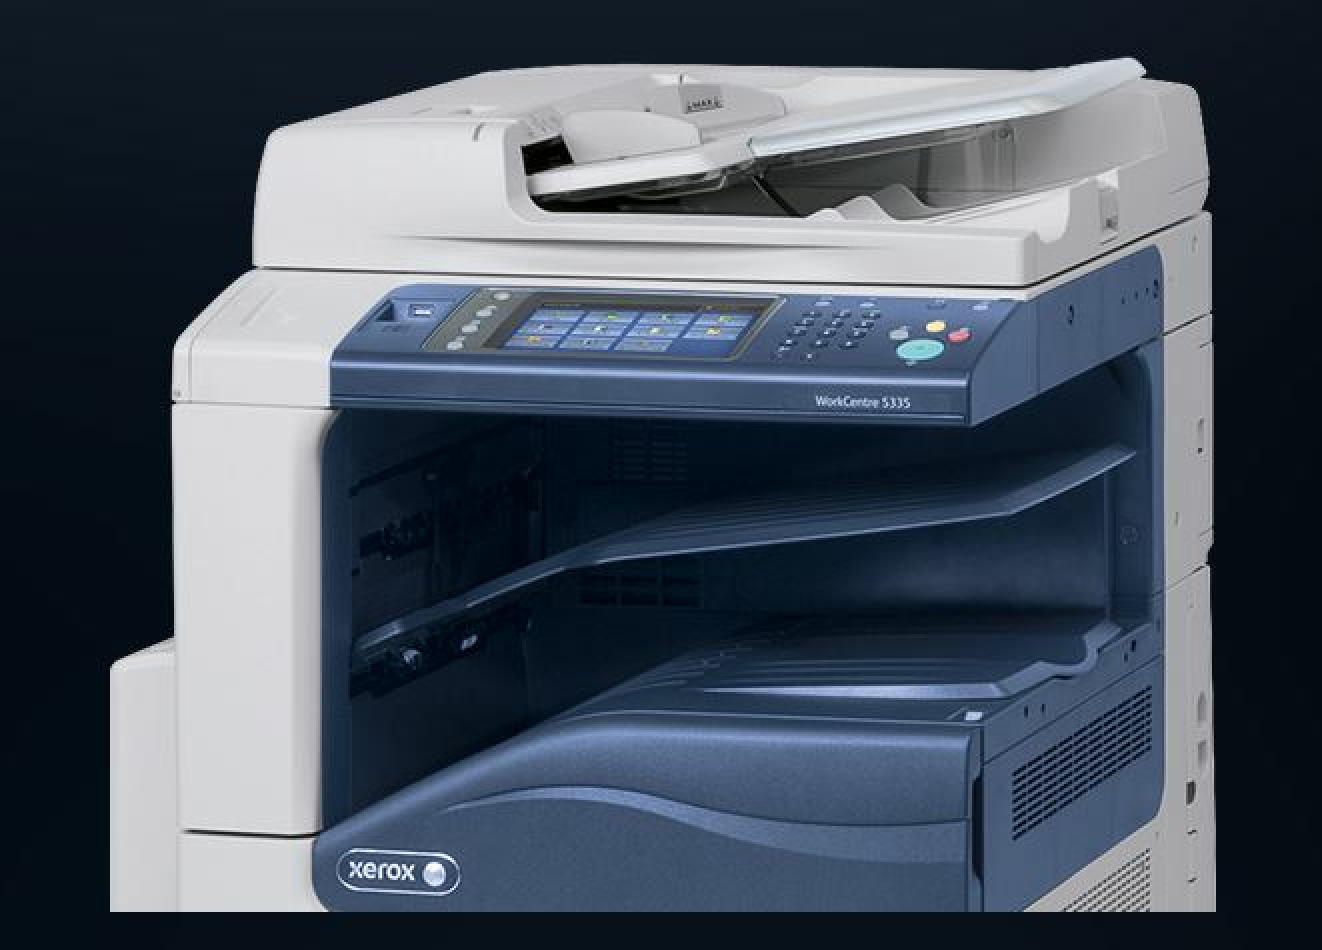 Xerox 5325 Above 75% Black &amp; White Used A Ethernet Rj-11 Usb 1 &lt;300K pages A4 A5 B/W Laser-Printer